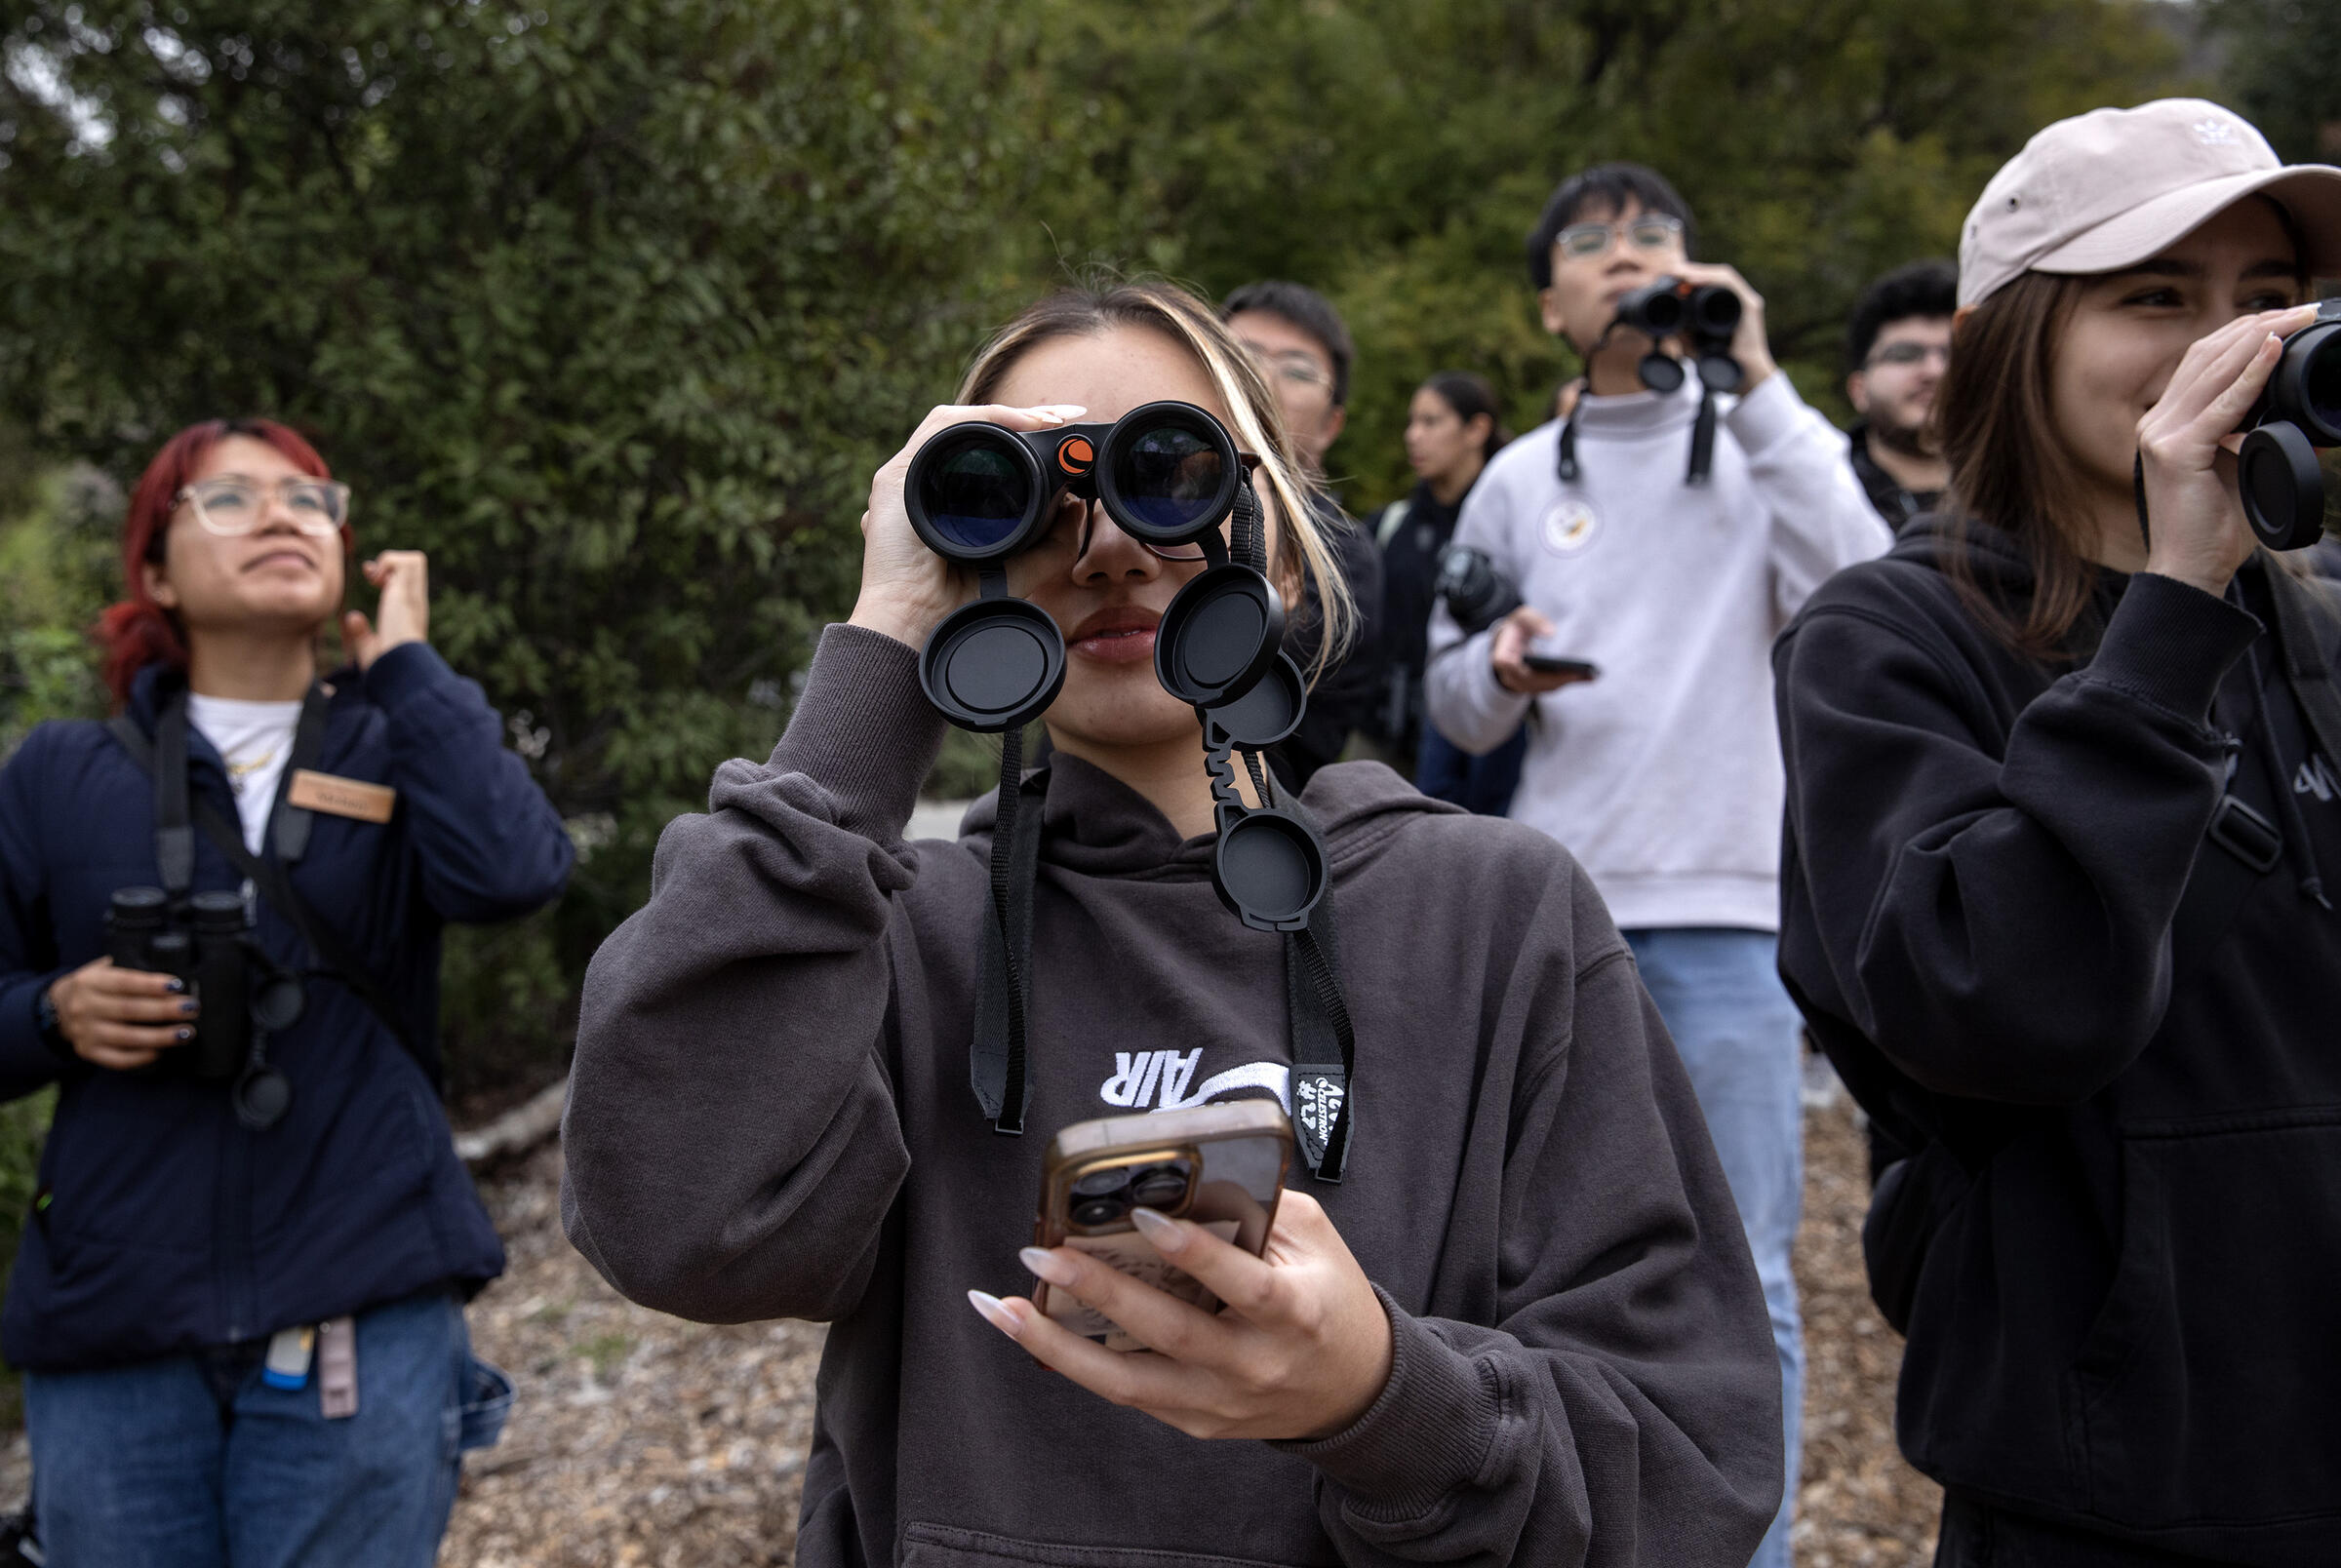 Photo of several young folks birding with binoculars